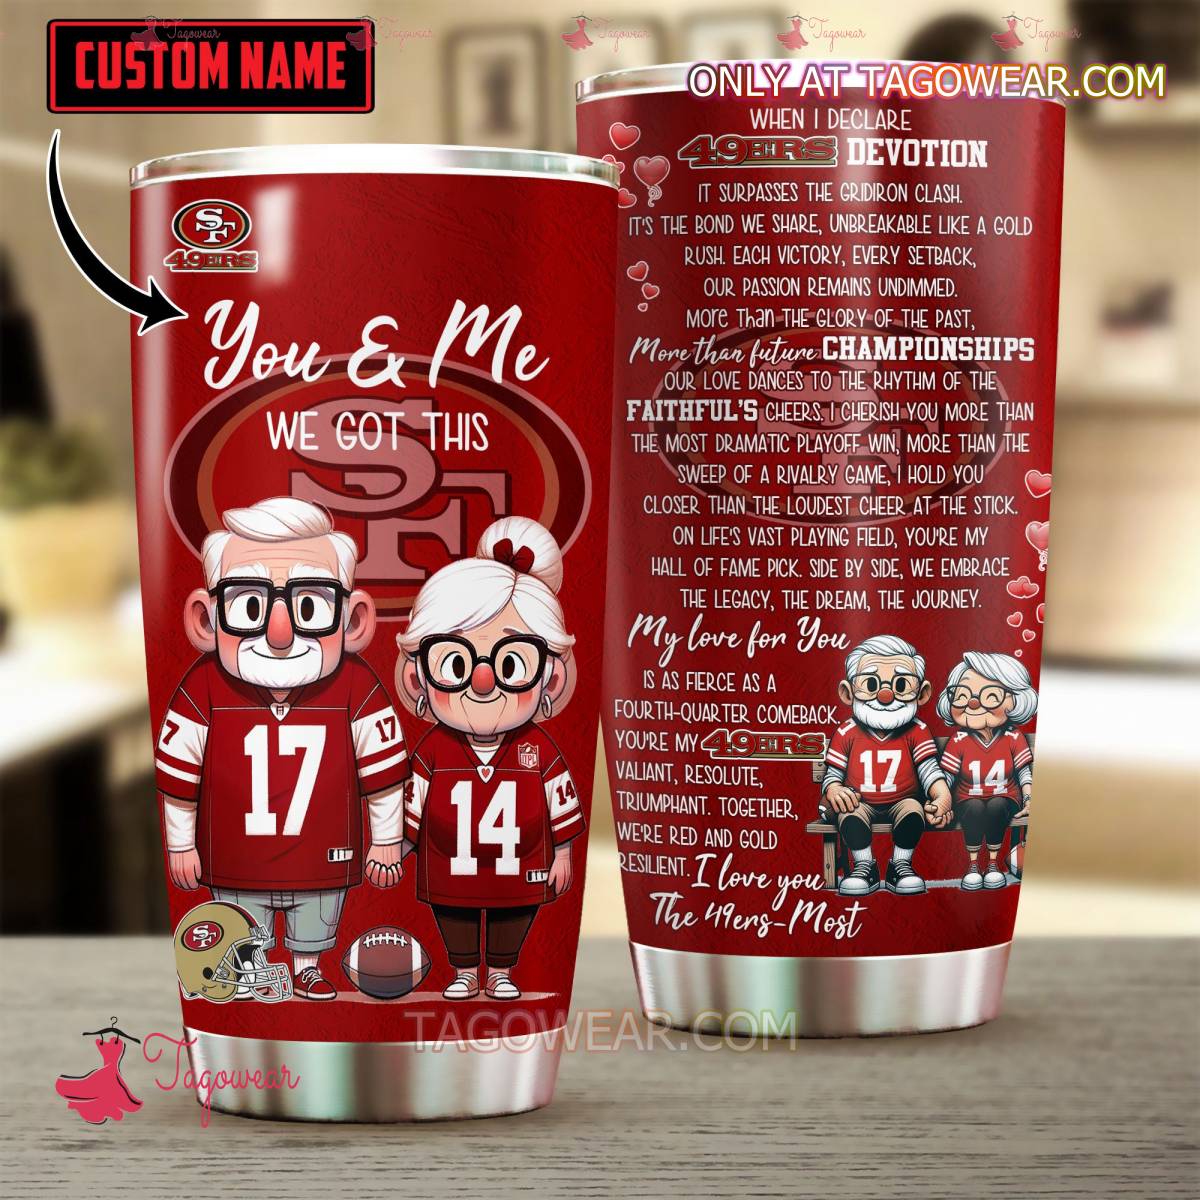 San Francisco 49ers You And Me We Got This When I Declare 49ers Devotion Personalized Tumbler